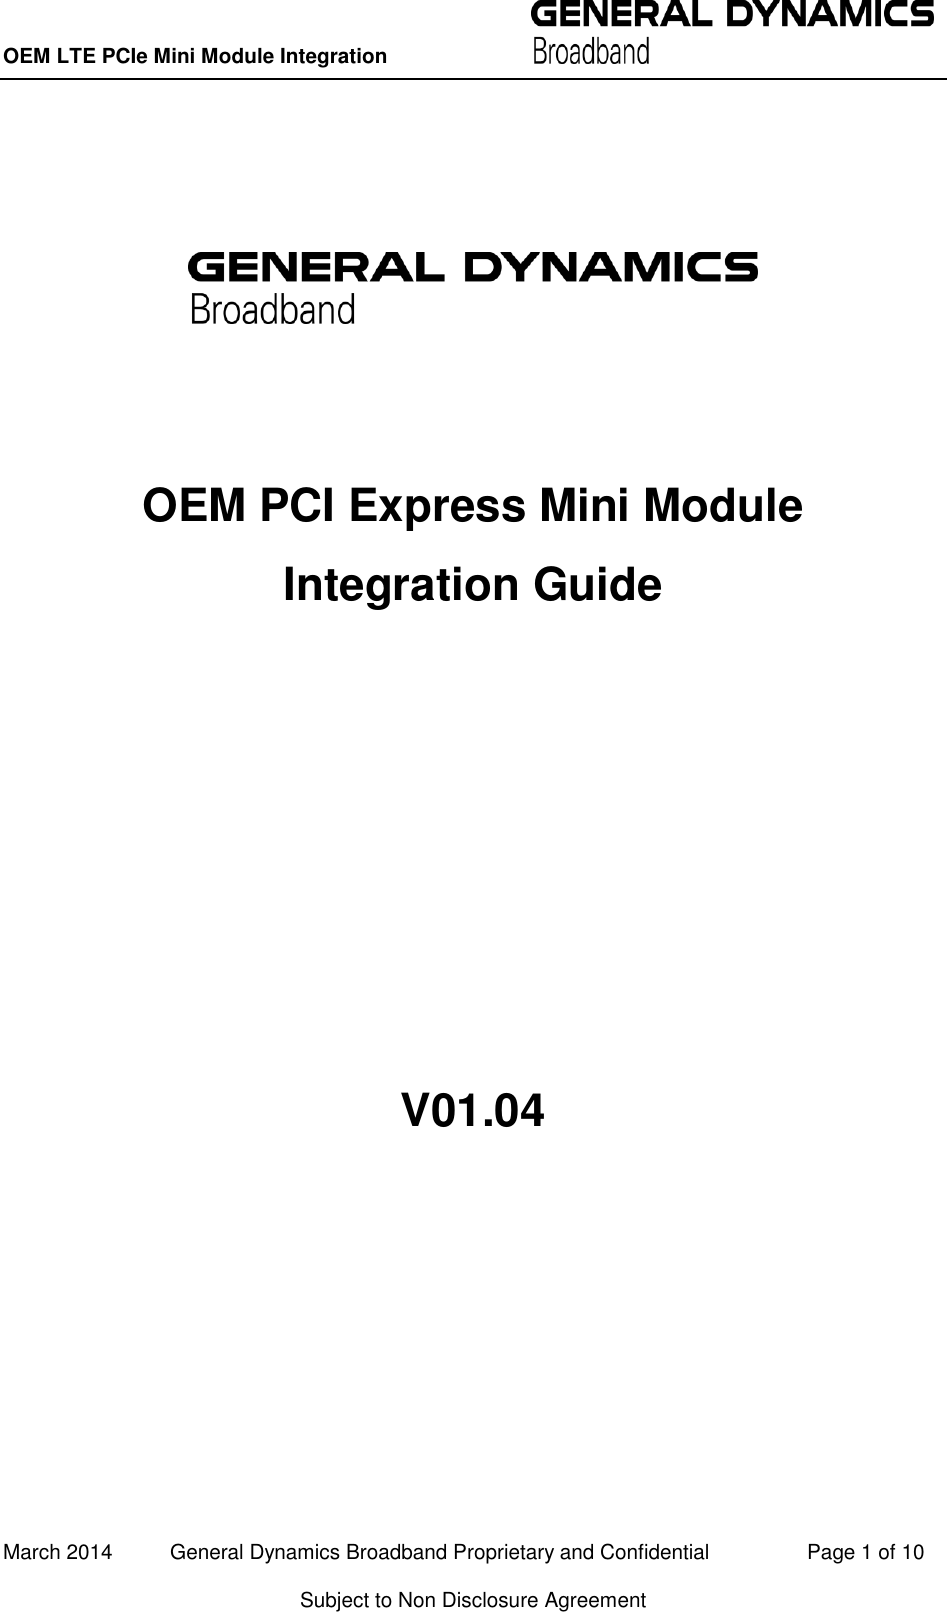 OEM LTE PCIe Mini Module Integration          March 2014          General Dynamics Broadband Proprietary and Confidential                 Page 1 of 10 Subject to Non Disclosure Agreement       OEM PCI Express Mini Module Integration Guide       V01.04    